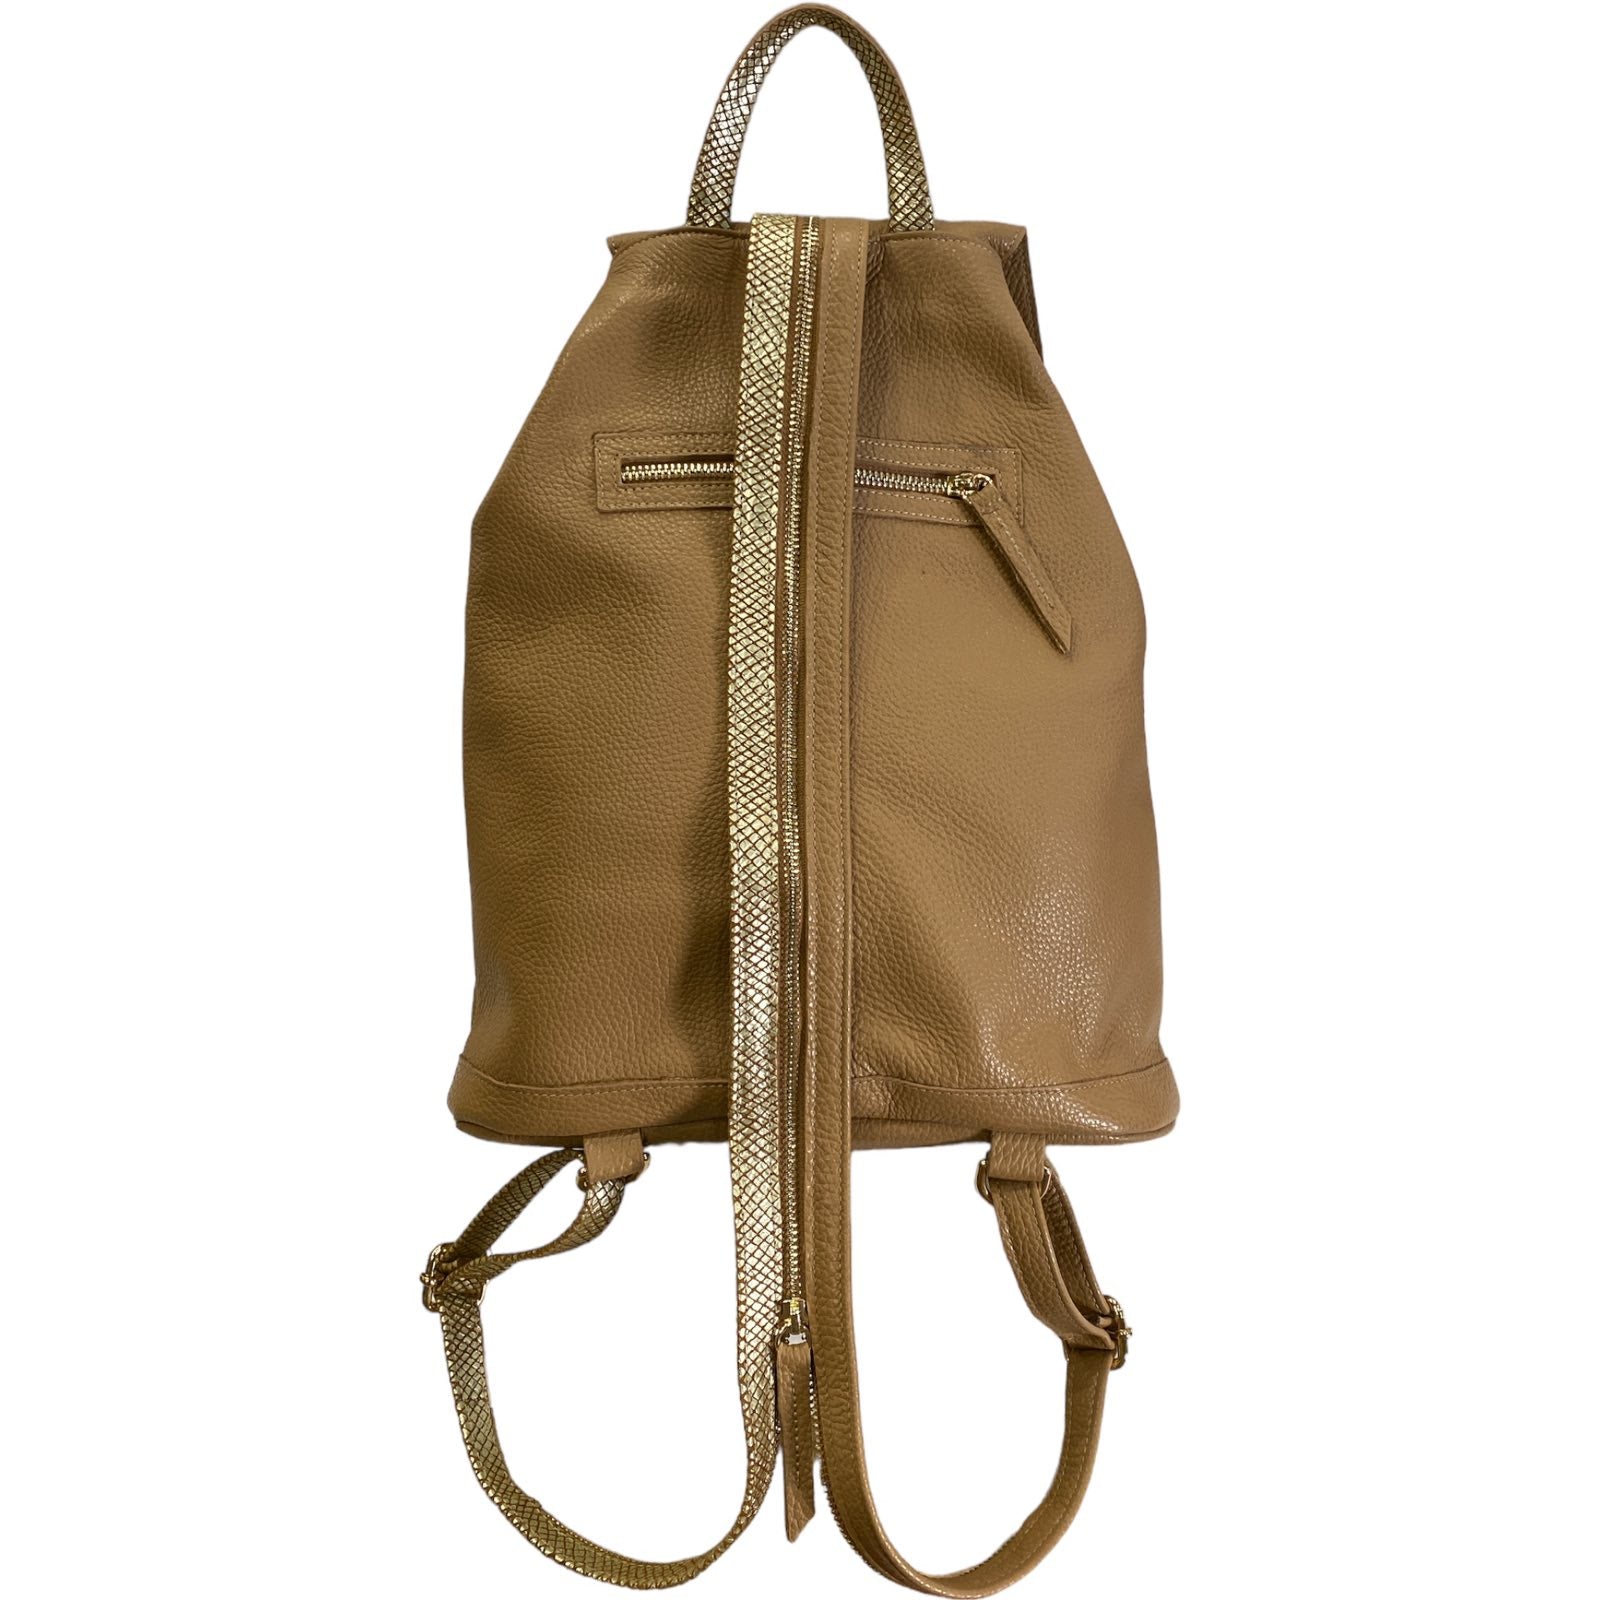 Travelling. Beige leather backpack with vintage calf-hair details